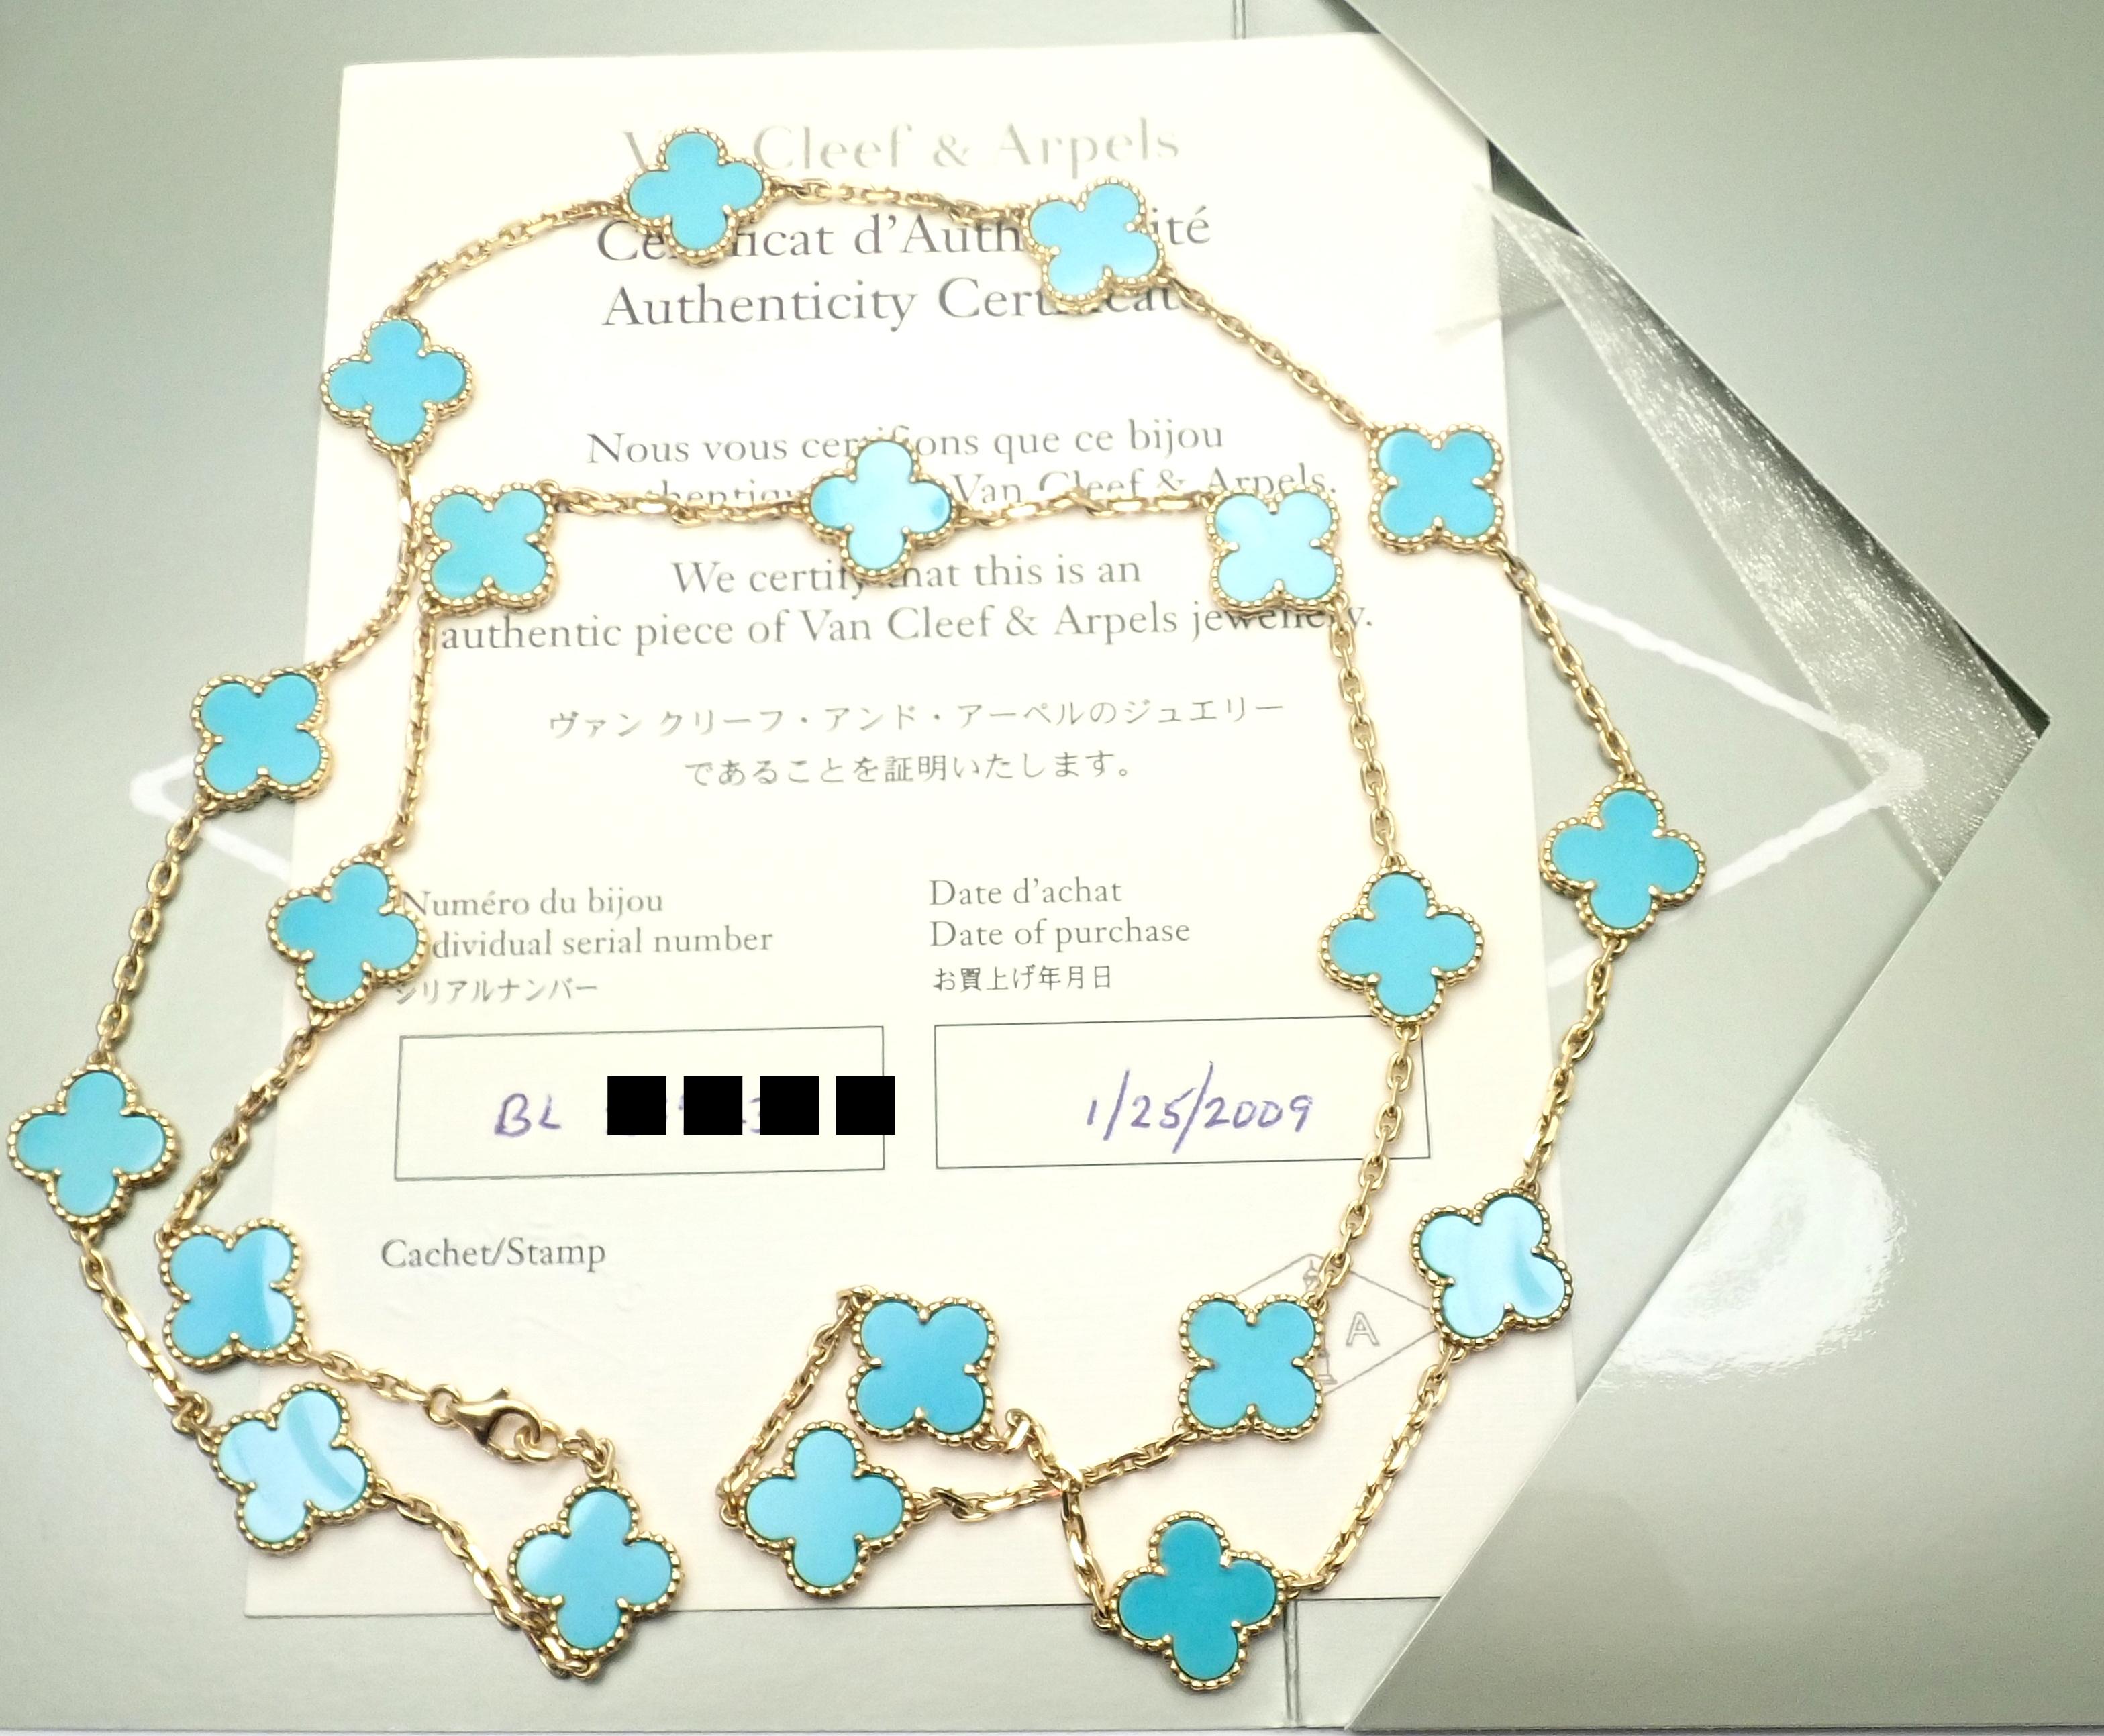 18k Yellow Gold Alhambra 20 Motifs Turquoise Necklace by Van Cleef & Arpels. 
This necklace comes with a Van Cleef & Arpels certificate from VCA store and a box.
With 20 motifs of turquoise alhambra stones 15mm each
Details: 
Length: 32